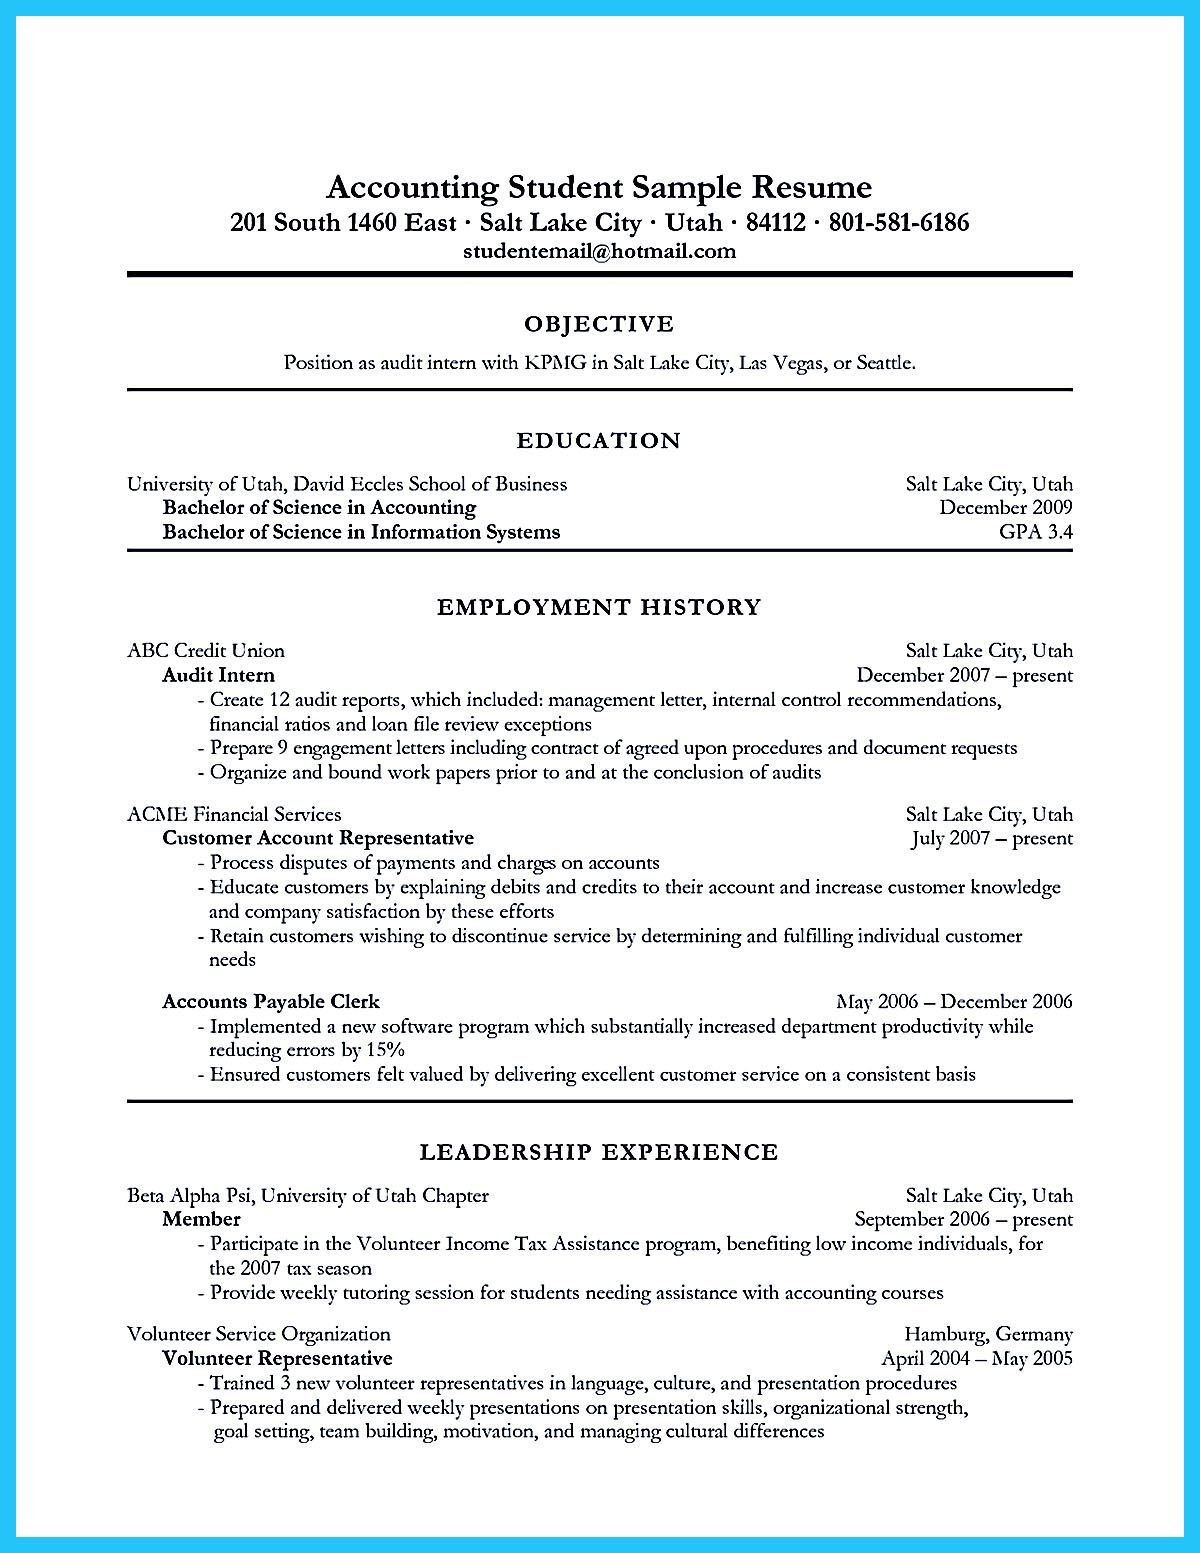 Resume Objective Sample for Summer Job Awesome Accounting Student Resume with No Experience Resume …